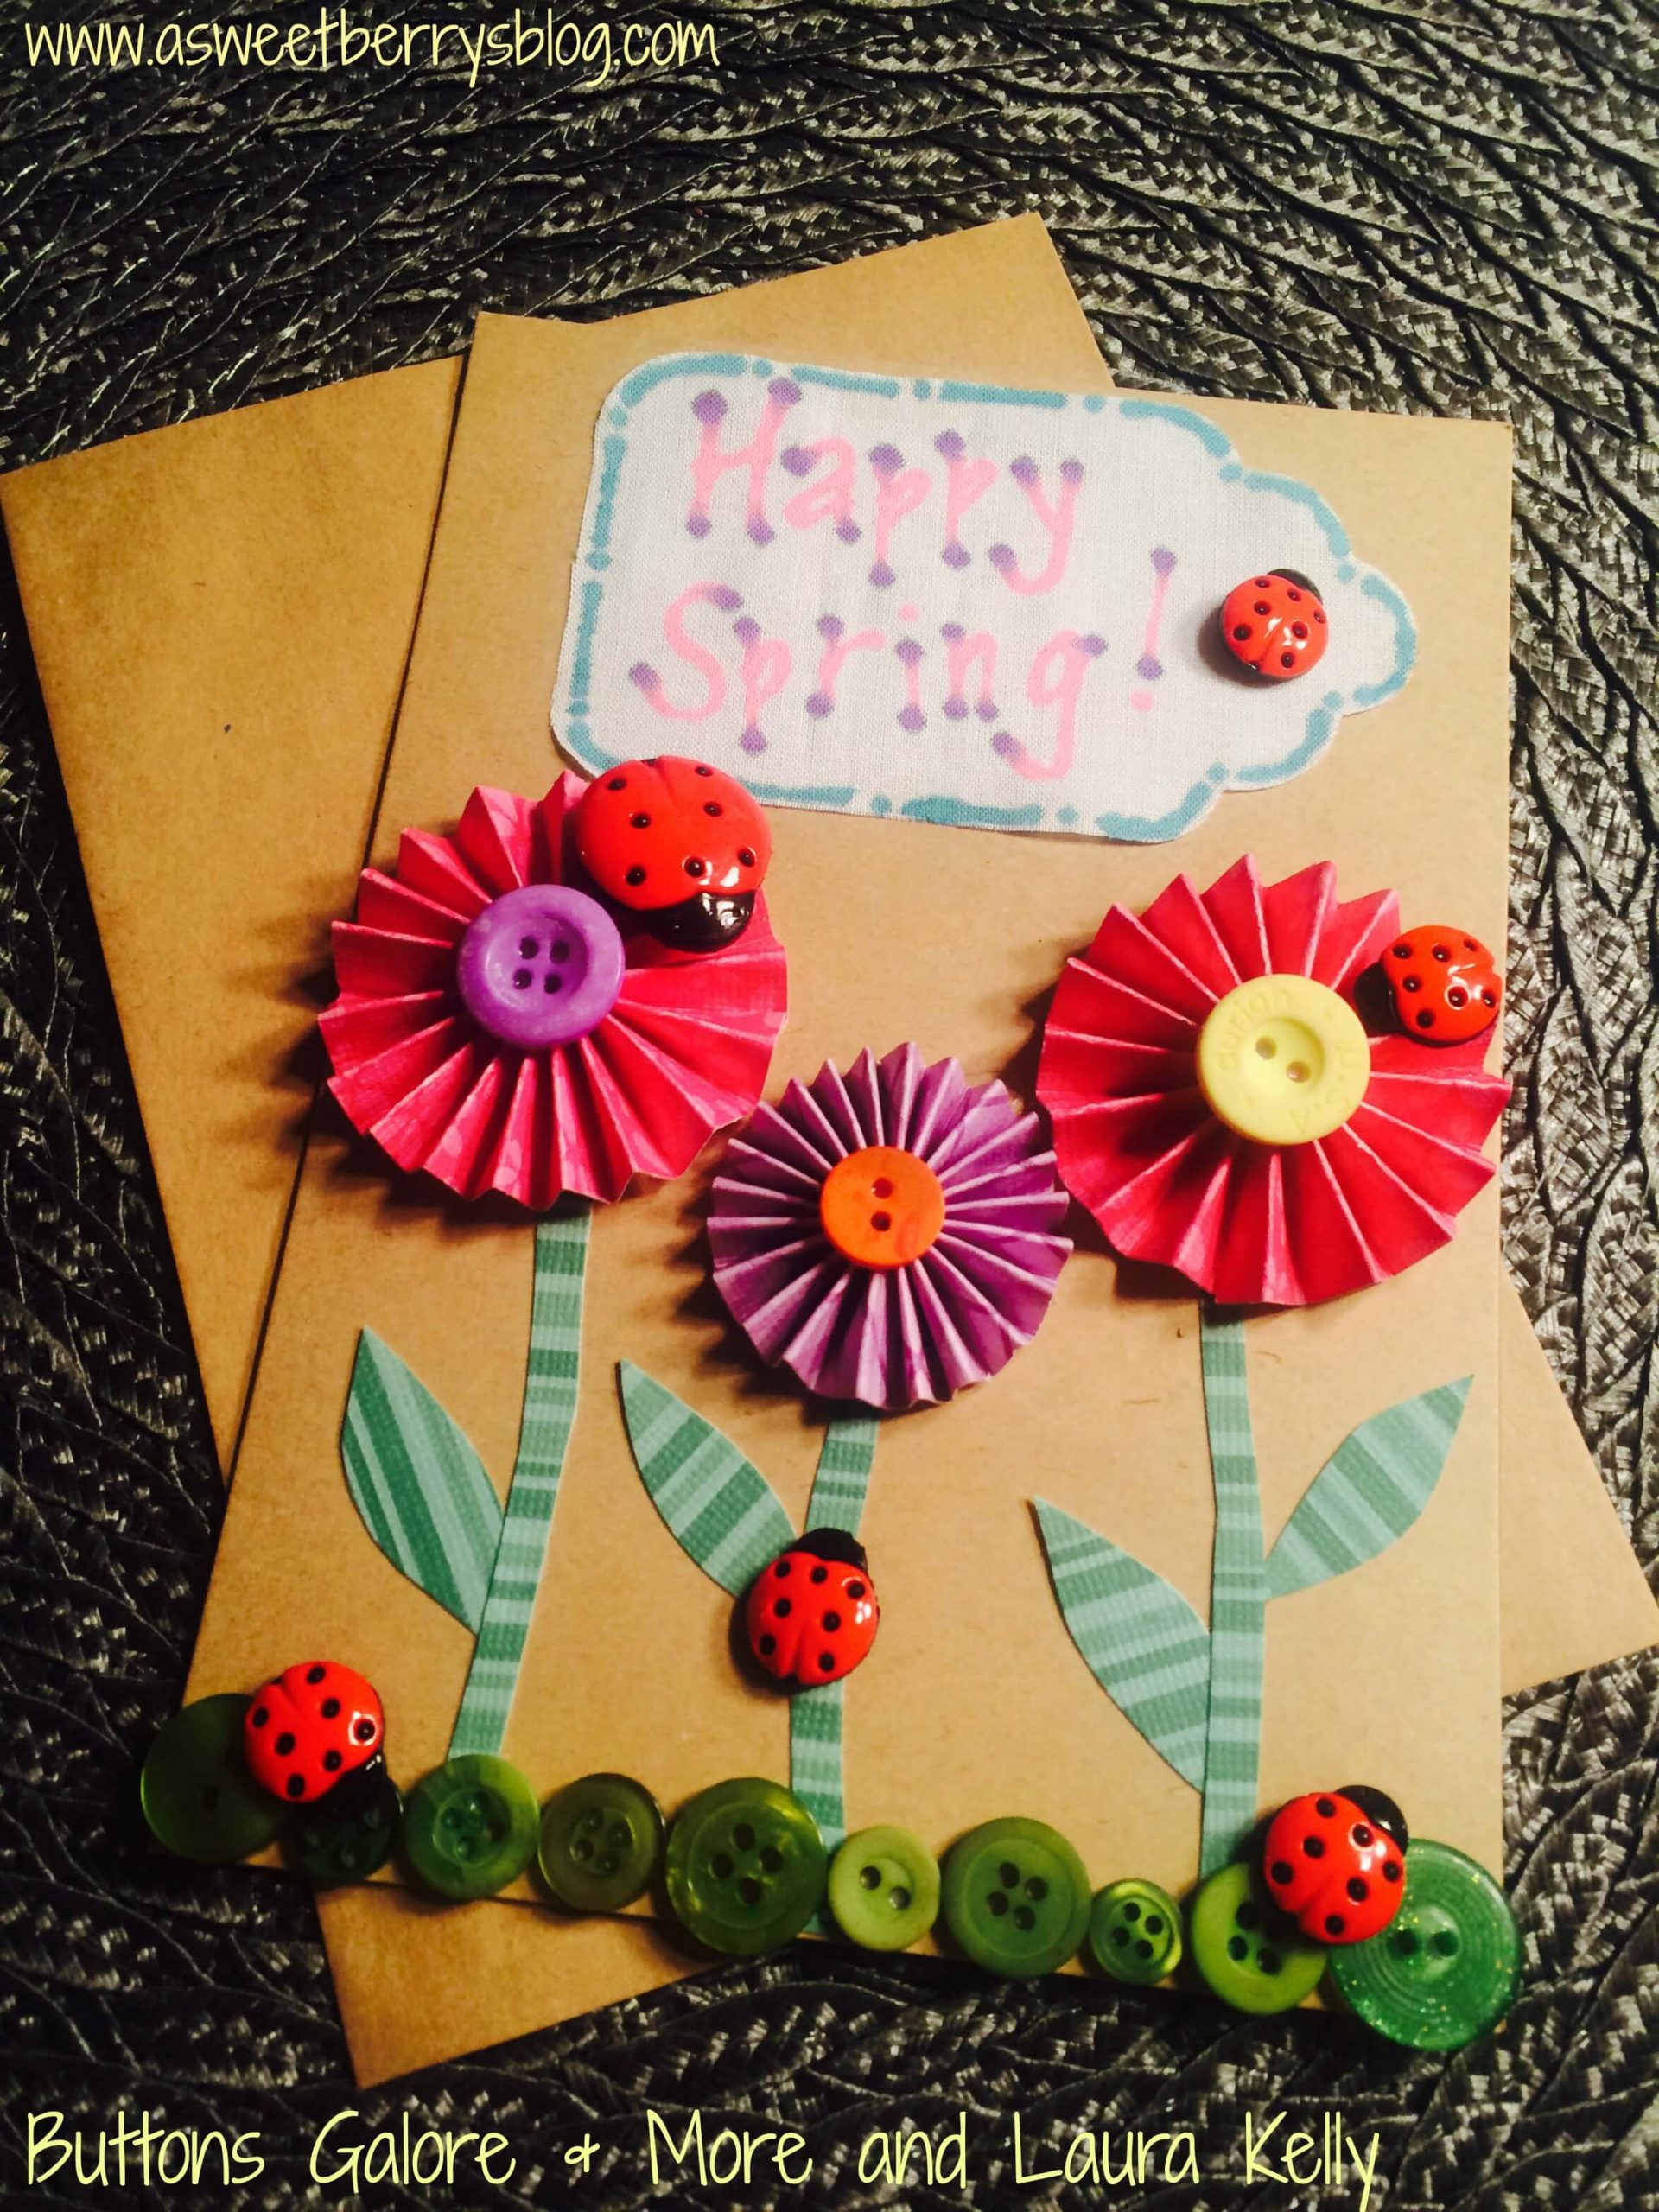 Adorable Ladybug Button Card Idea Using PaperButton Craft on paper